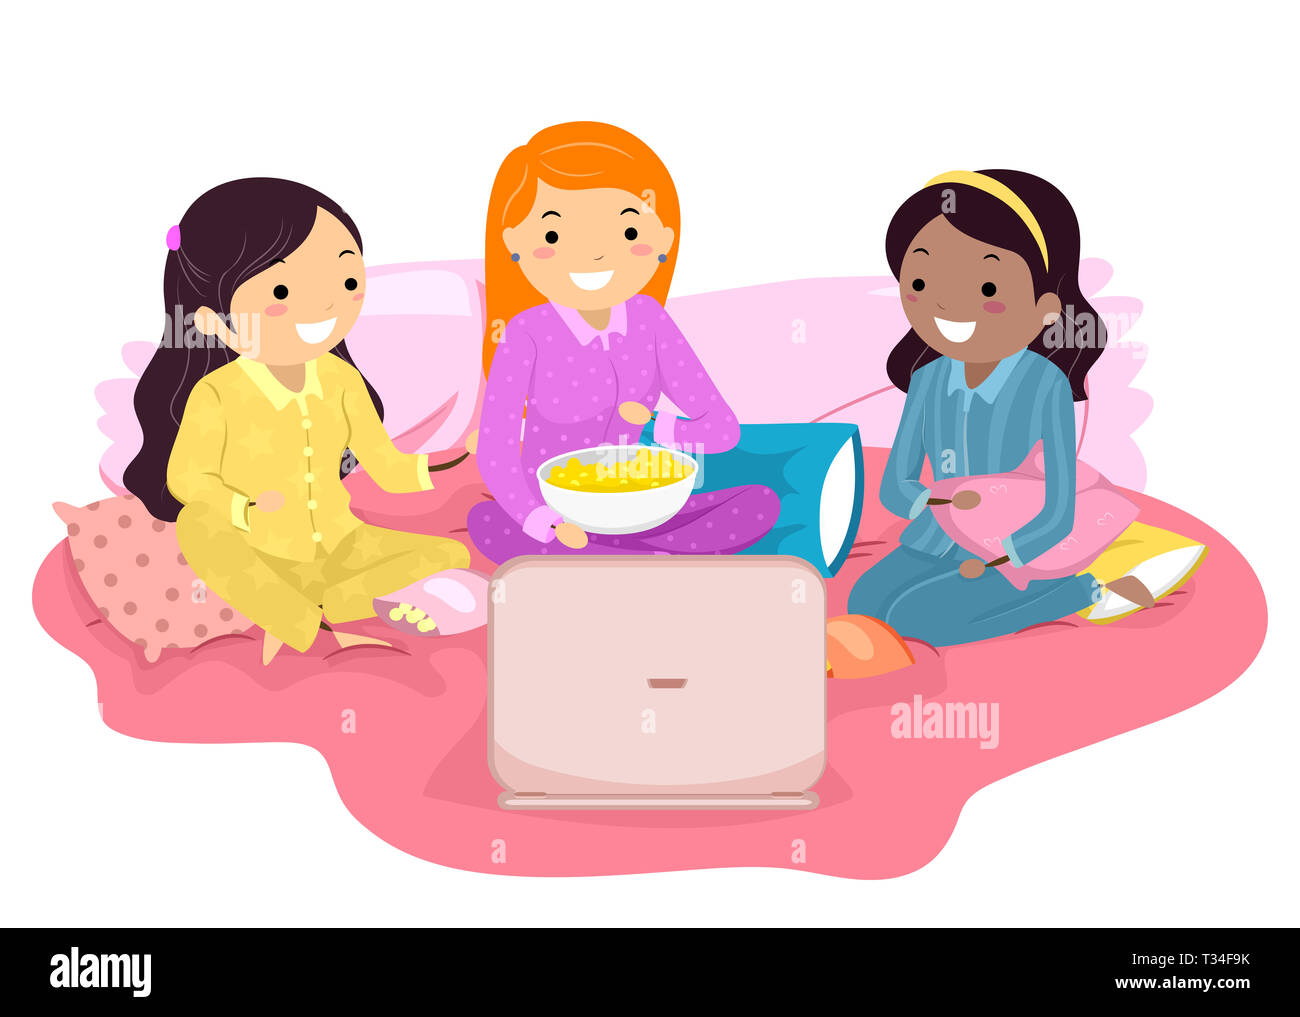 Illustration of Stickman Teens Wearing Pajamas on Bed Watching a Show or Movie on Laptop Stock Photo